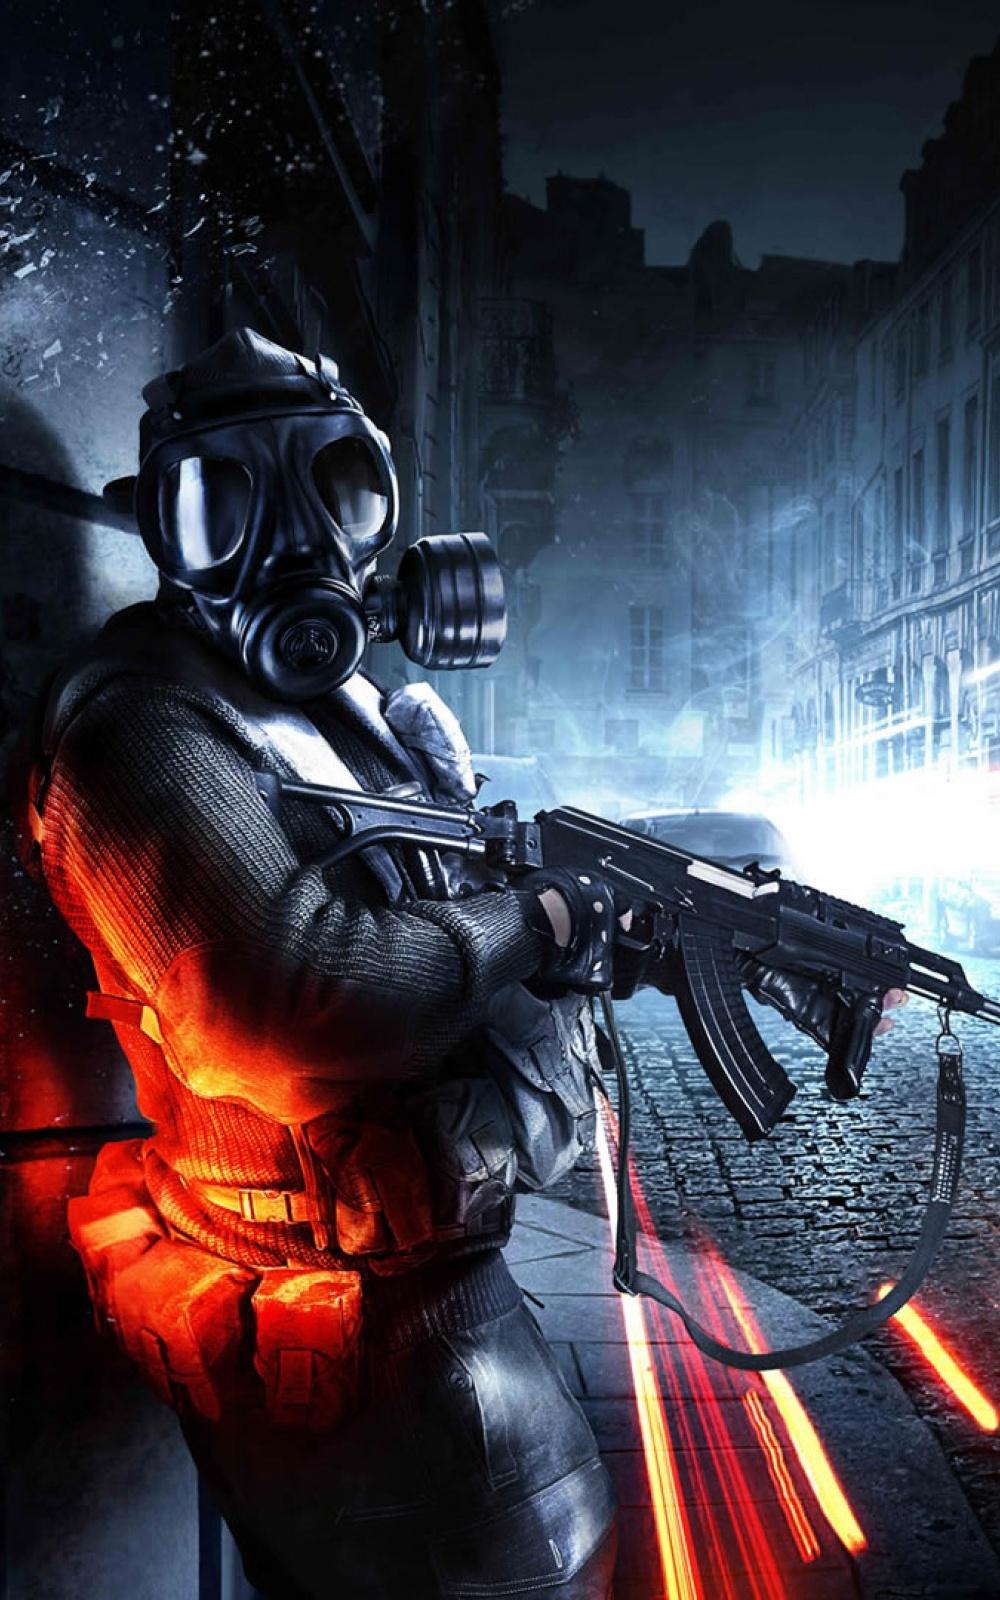 Battlefield Gas Mask City Android Wallpaper free download